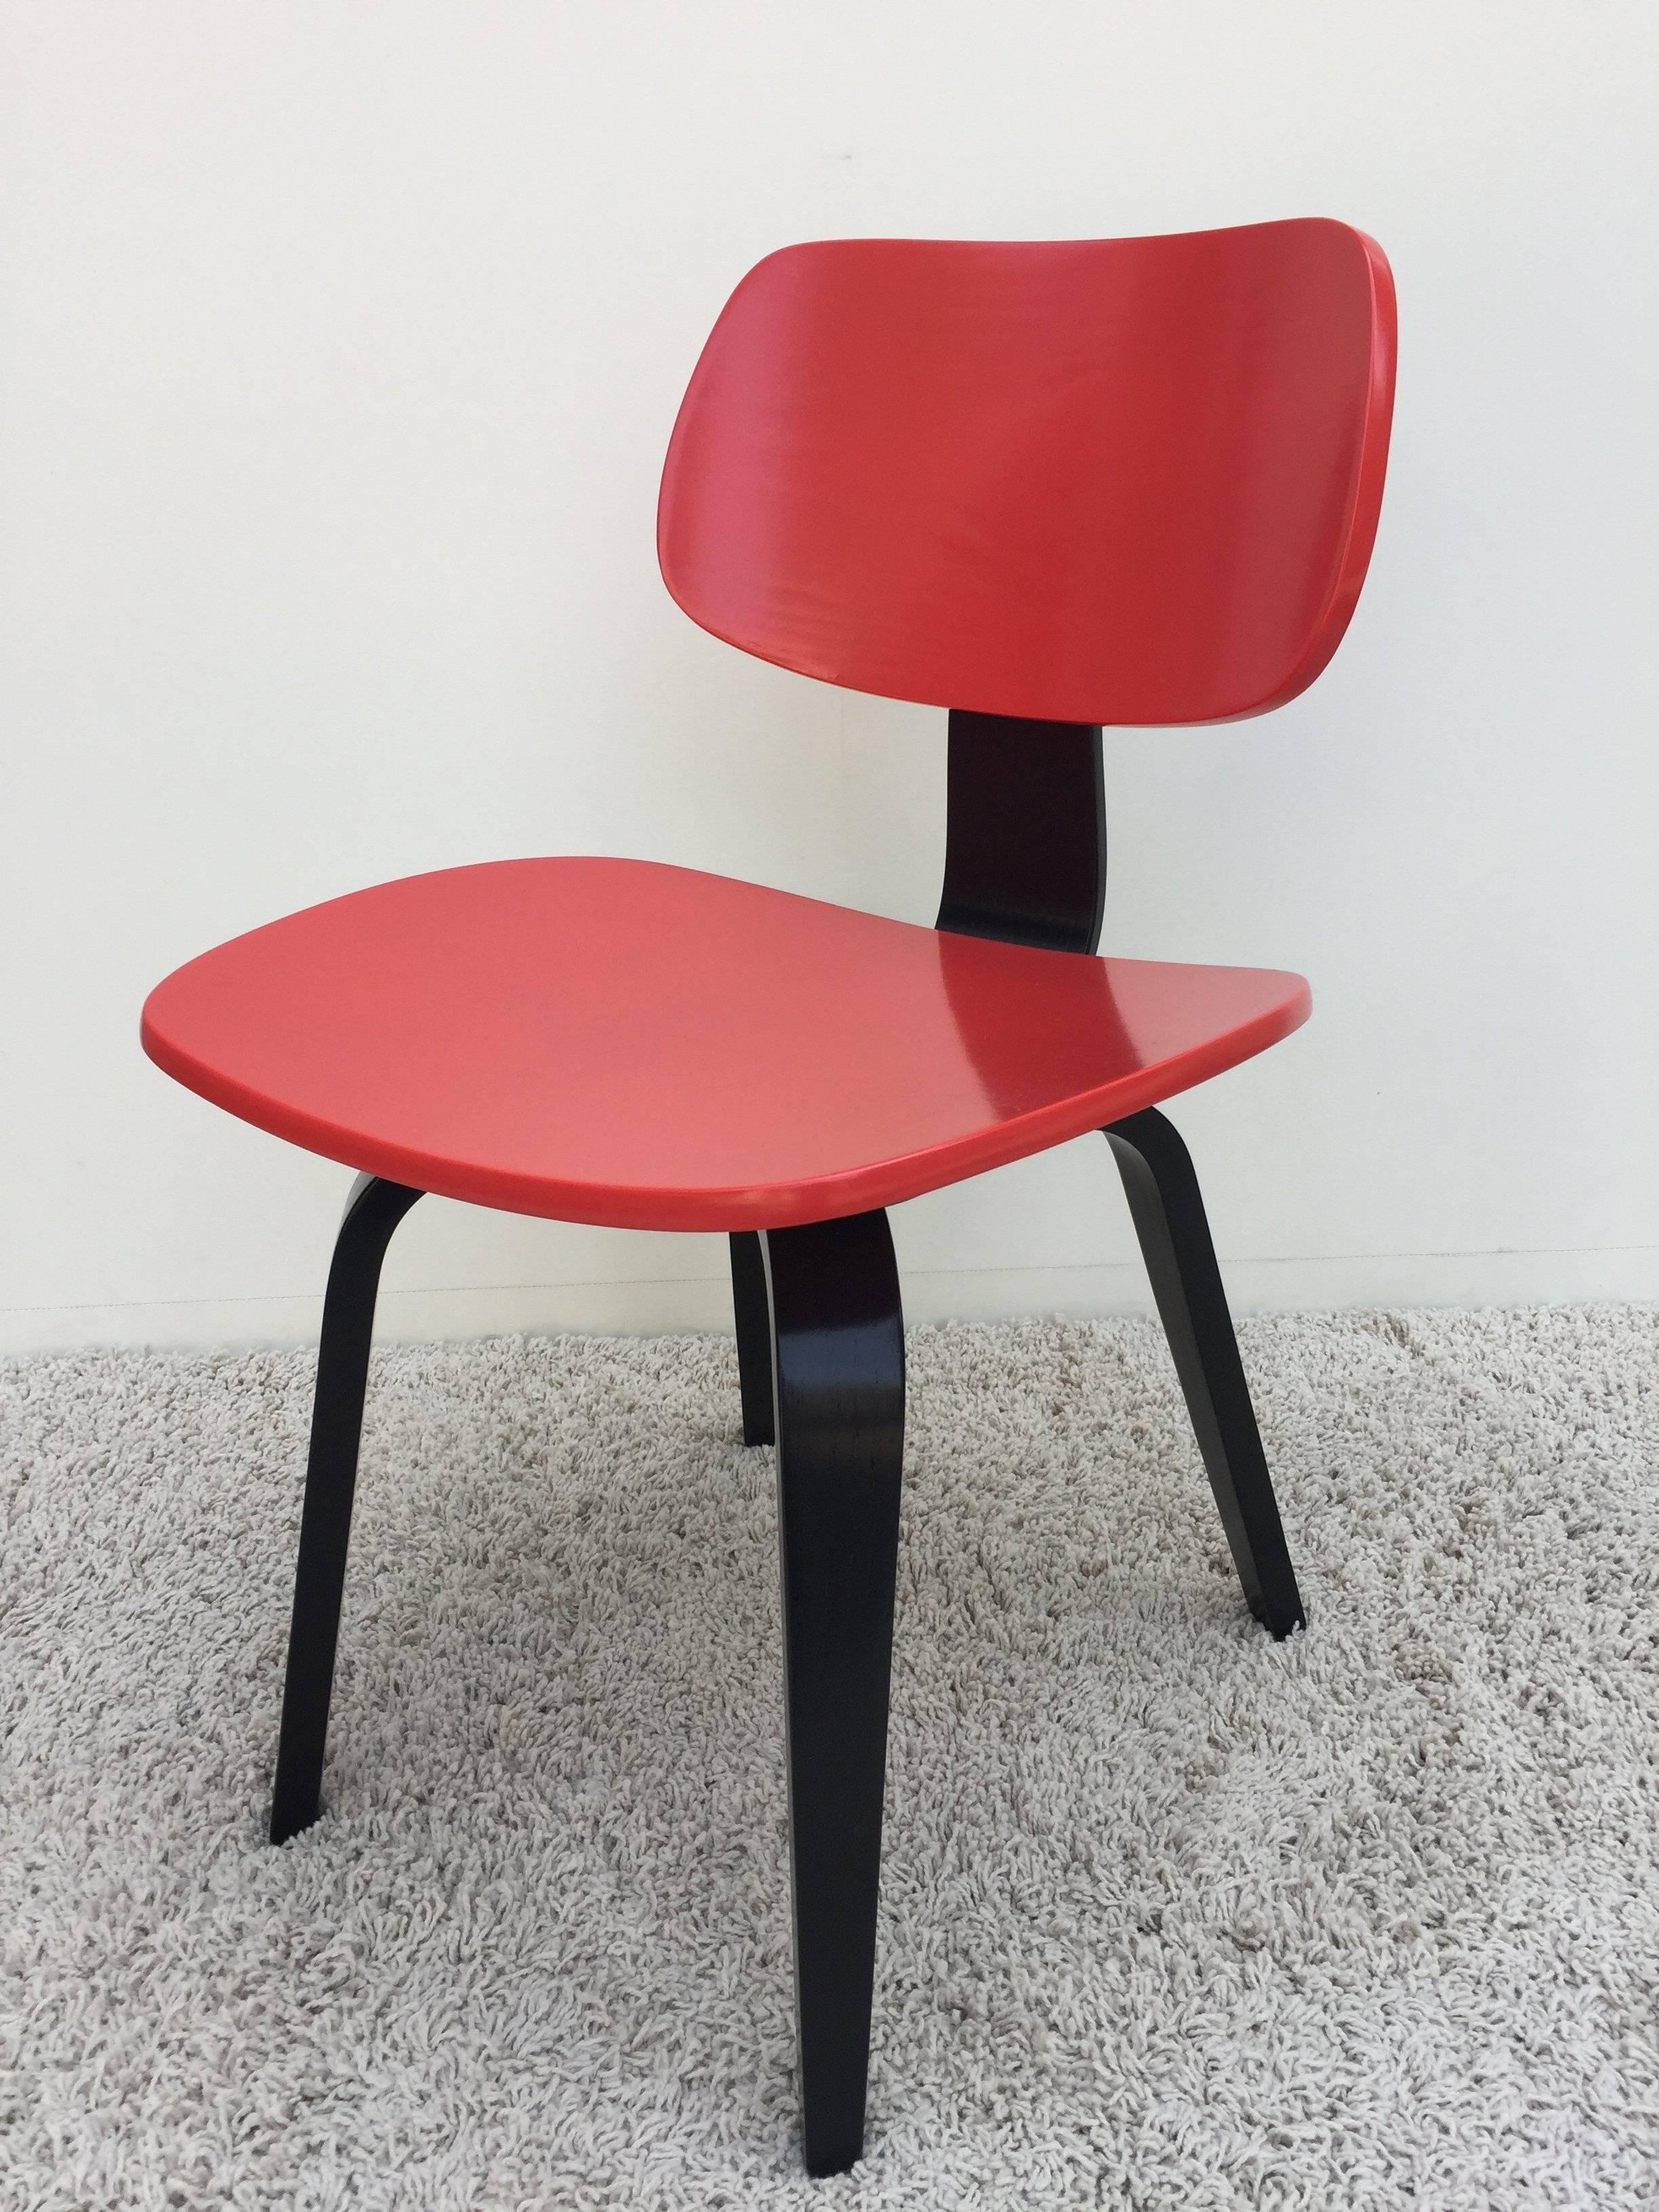 Thonet Bentwood Red and Black Lacquered Modernist Desk Chair In Excellent Condition For Sale In Westport, CT